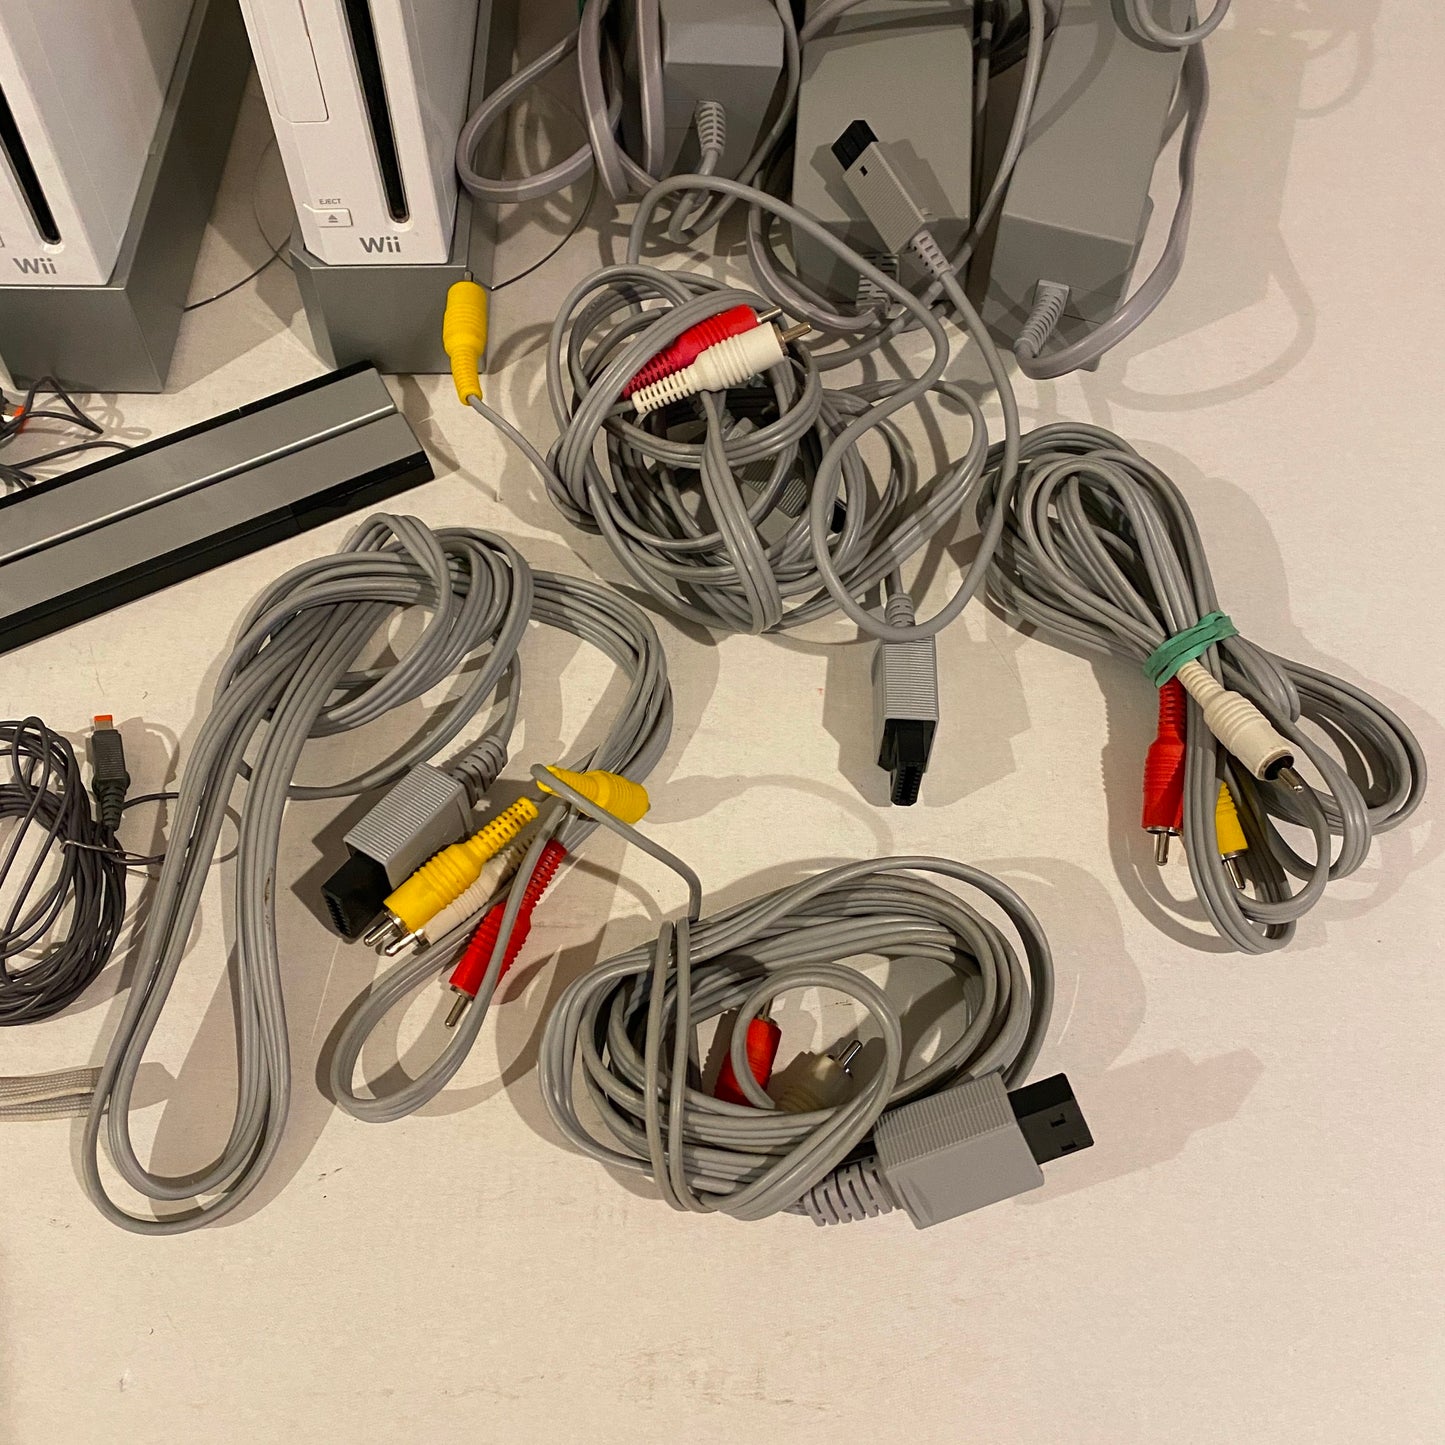 Nintento Wii - Working - Lot of 4, power supplies, A/V cables, accessories